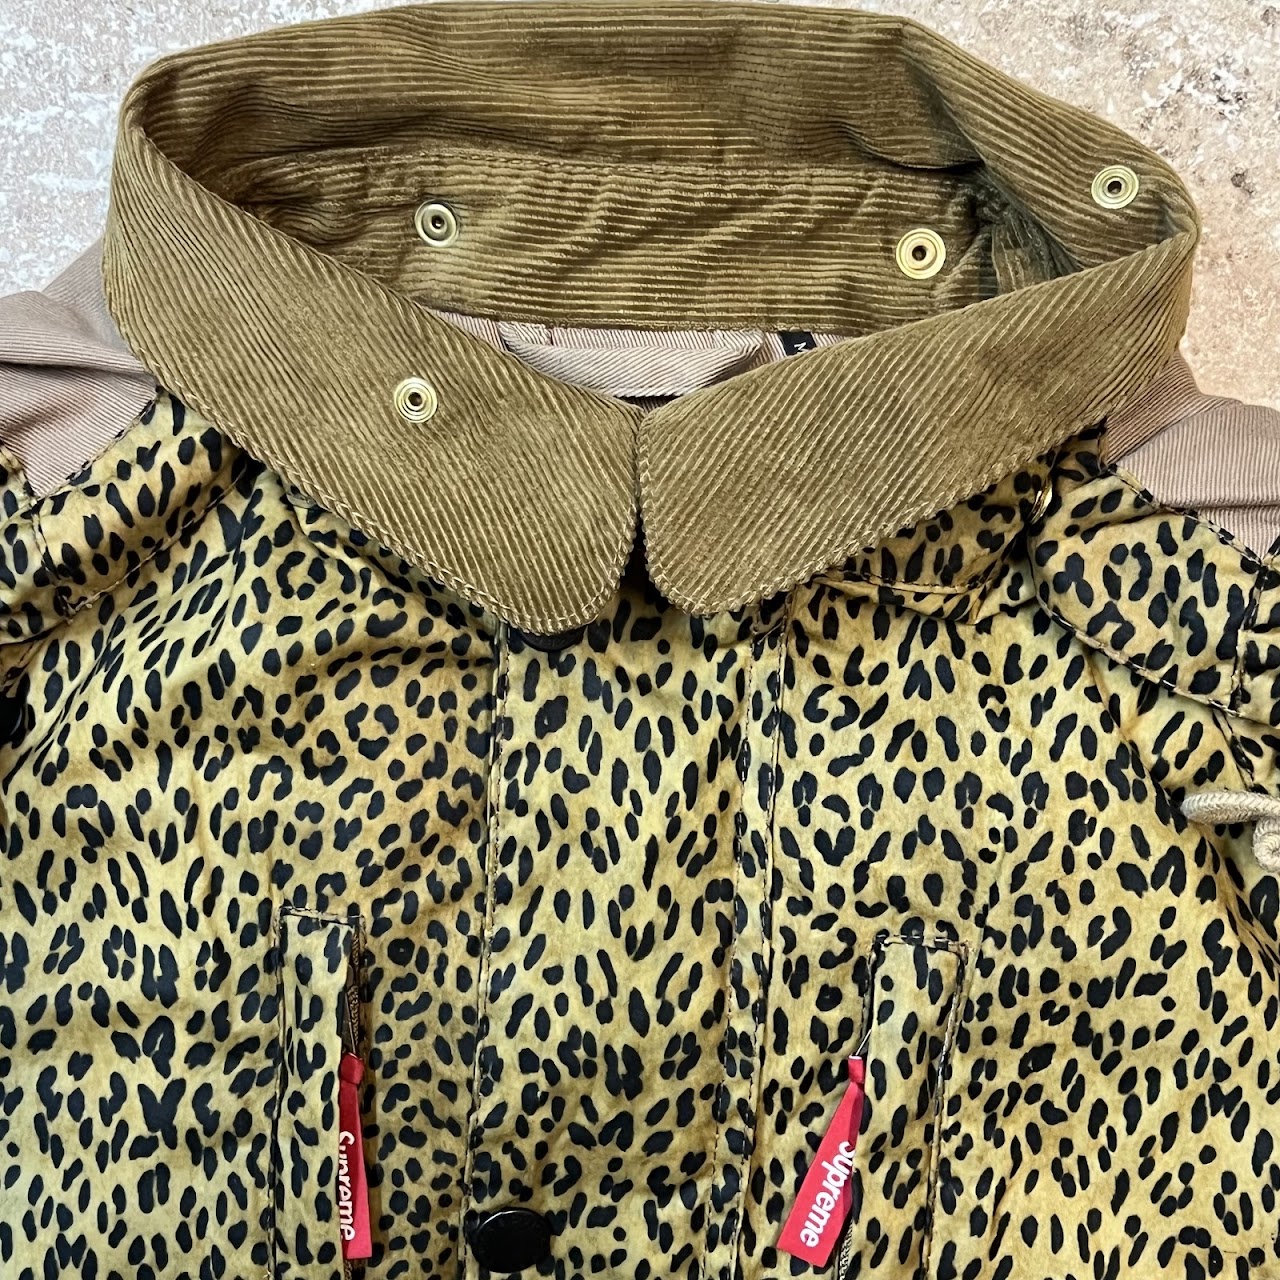 Supreme x Barbour Waxed Canvas Leopard Print Field Jacket